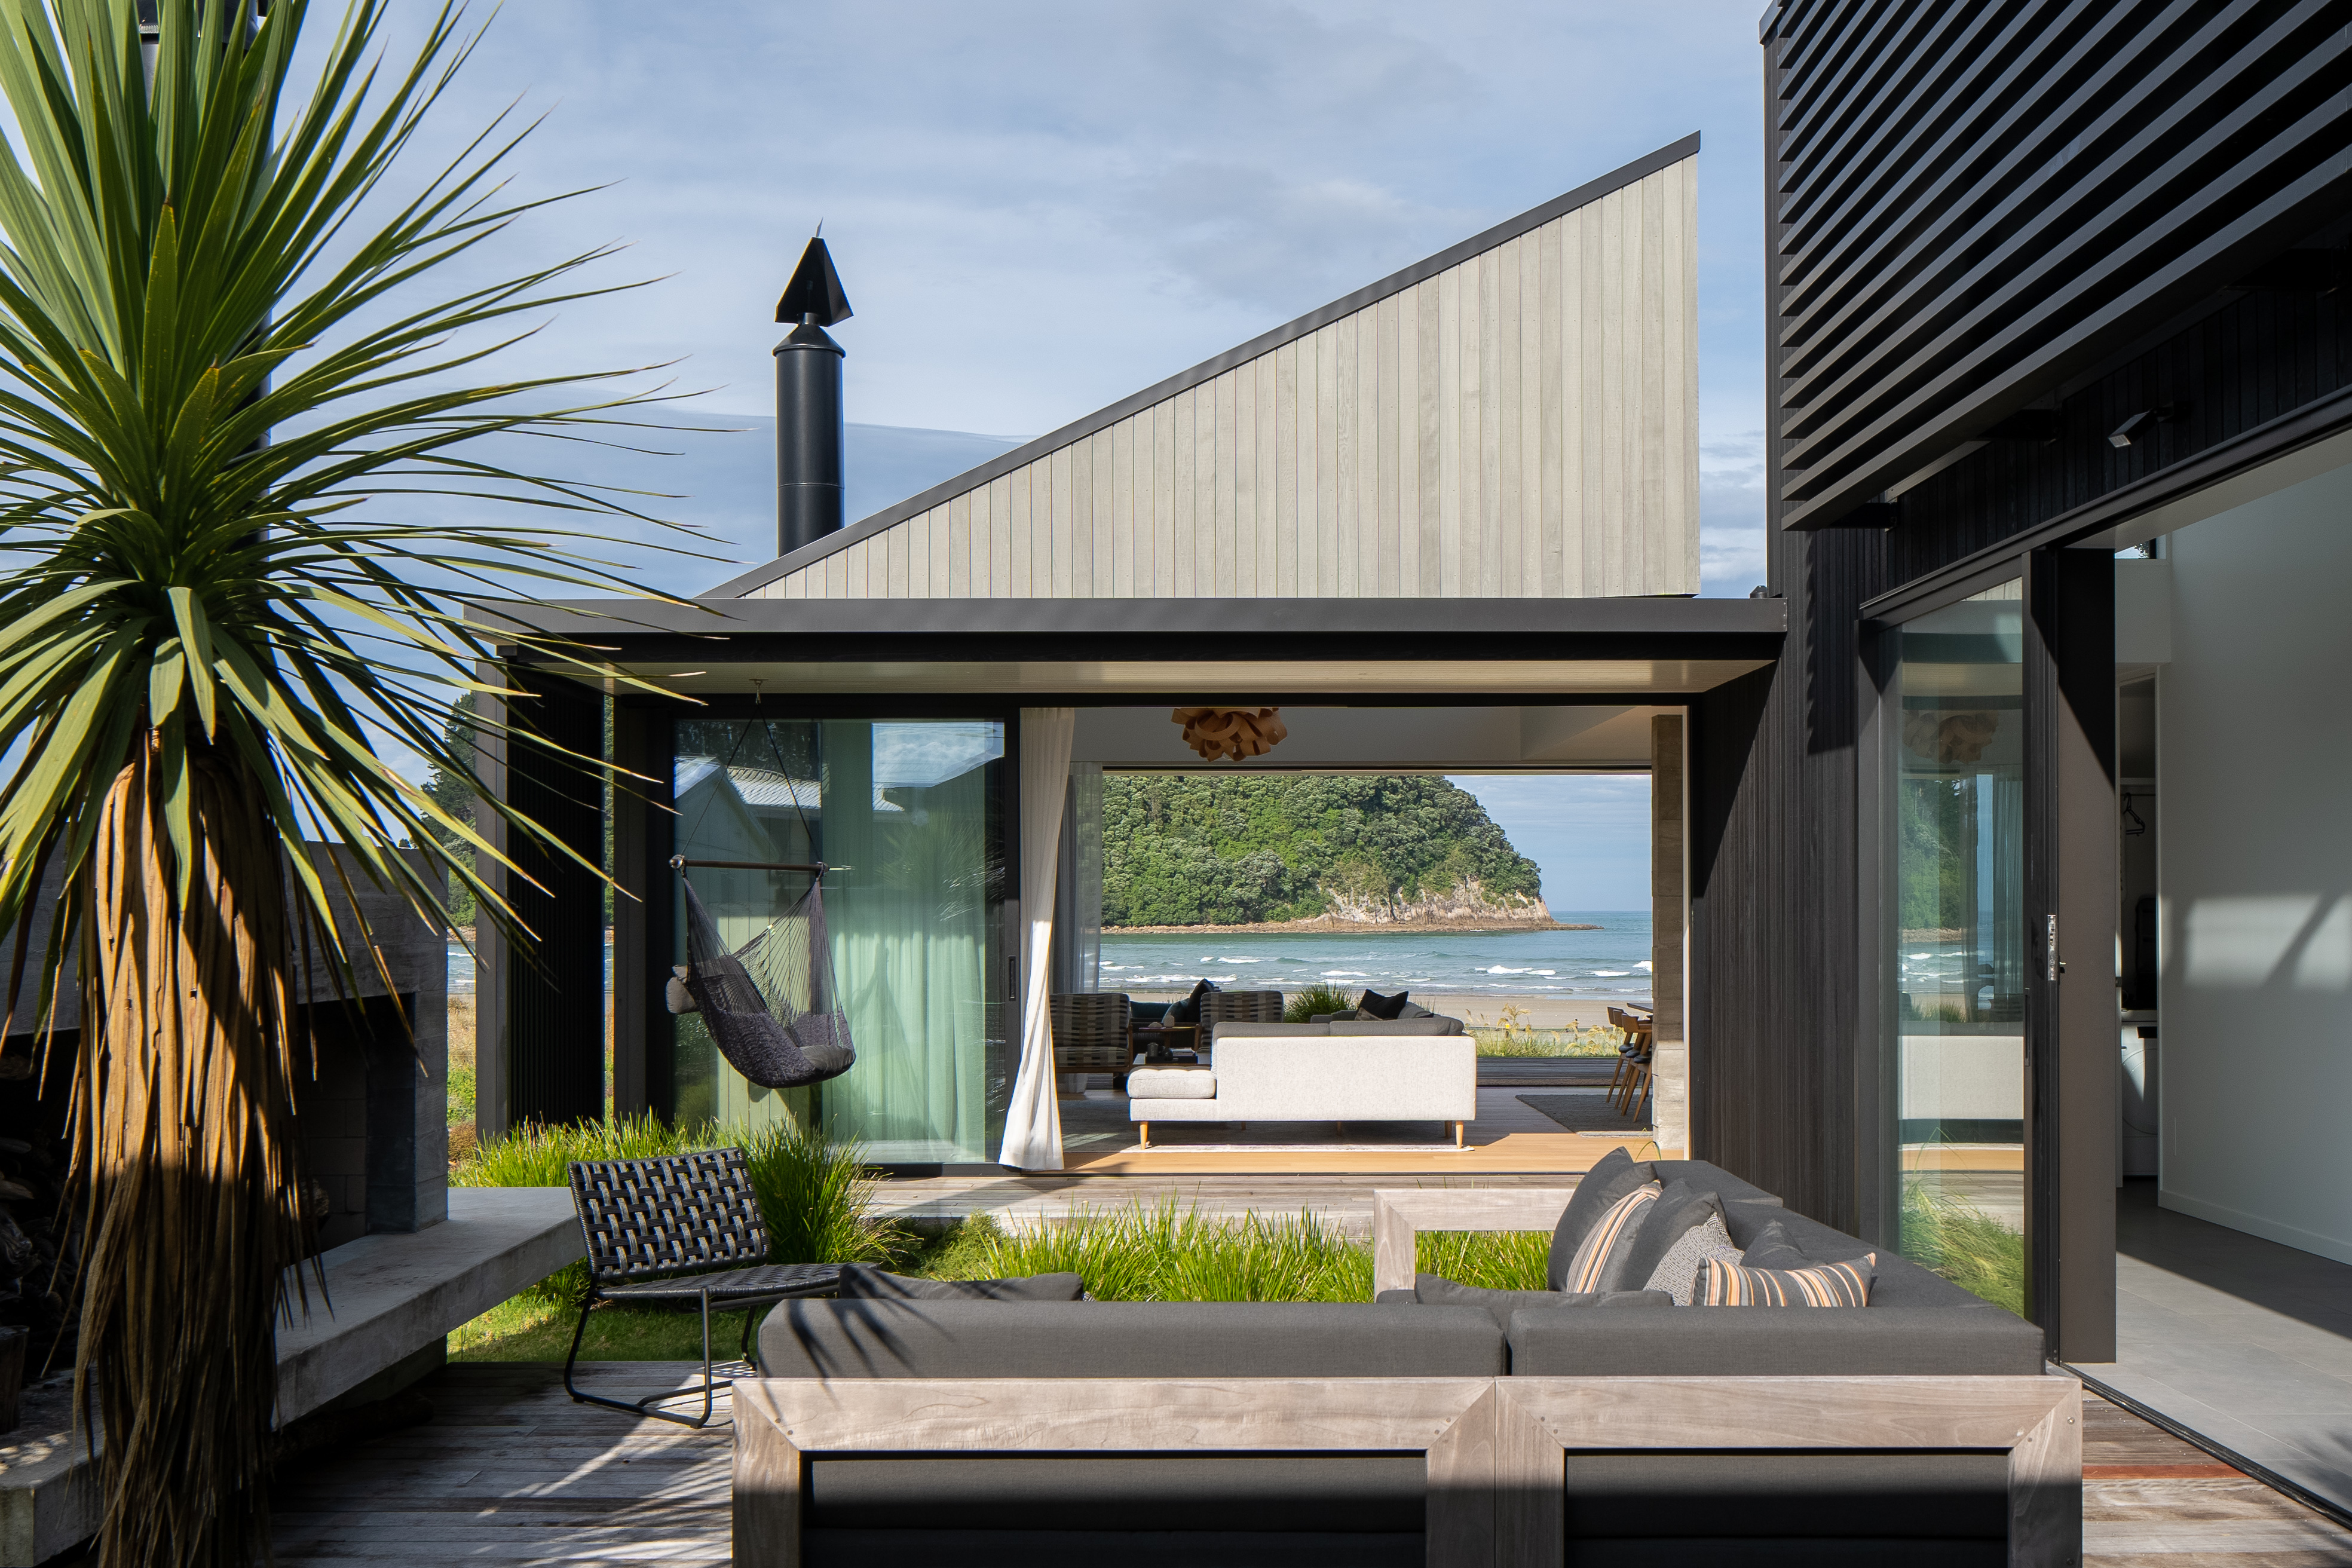 A U-shaped bach on a beachfront site in Whangamatā with a north-facing courtyard at its centre